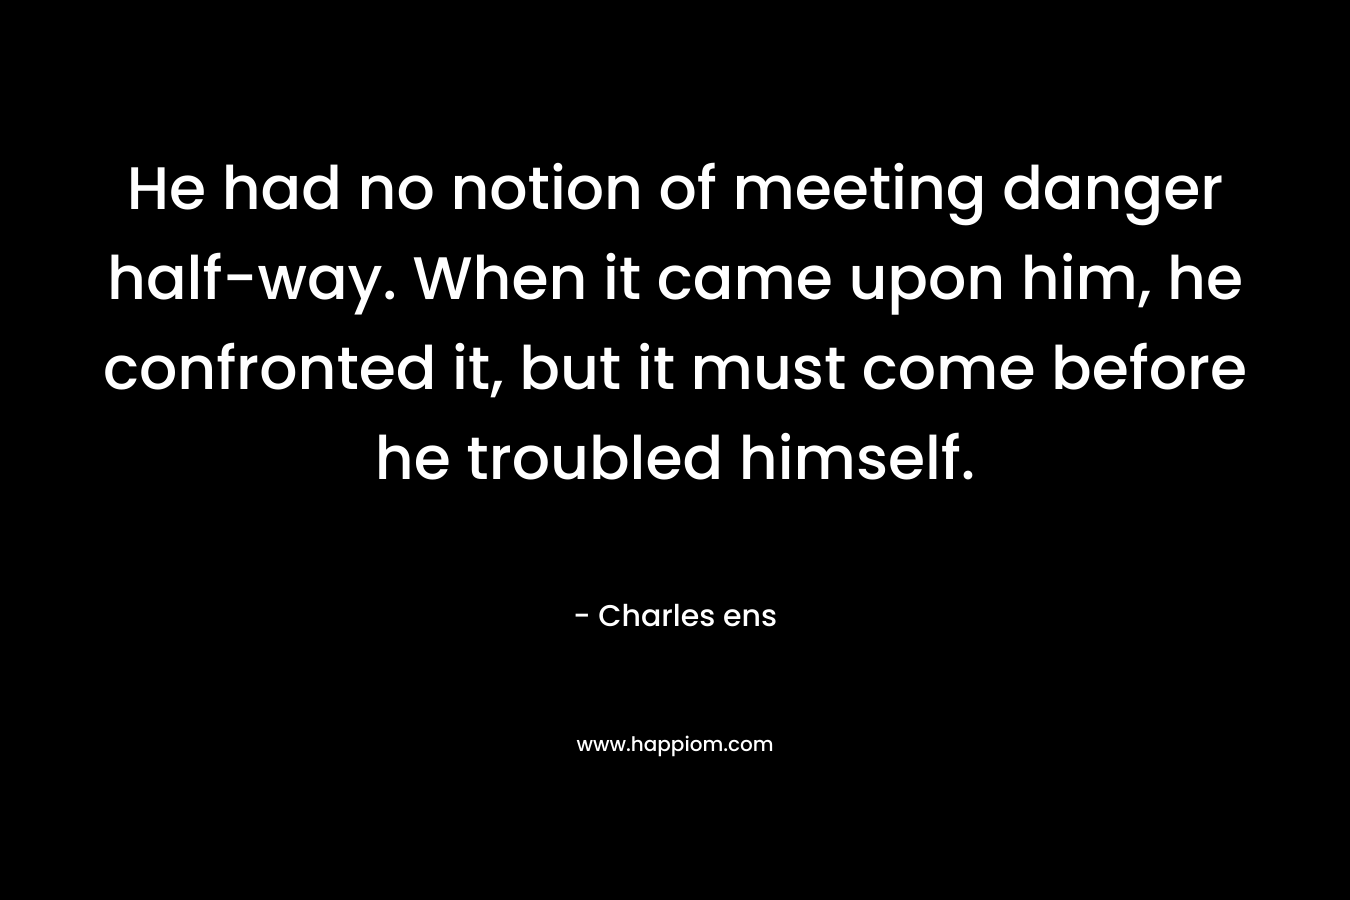 He had no notion of meeting danger half-way. When it came upon him, he confronted it, but it must come before he troubled himself. – Charles ens